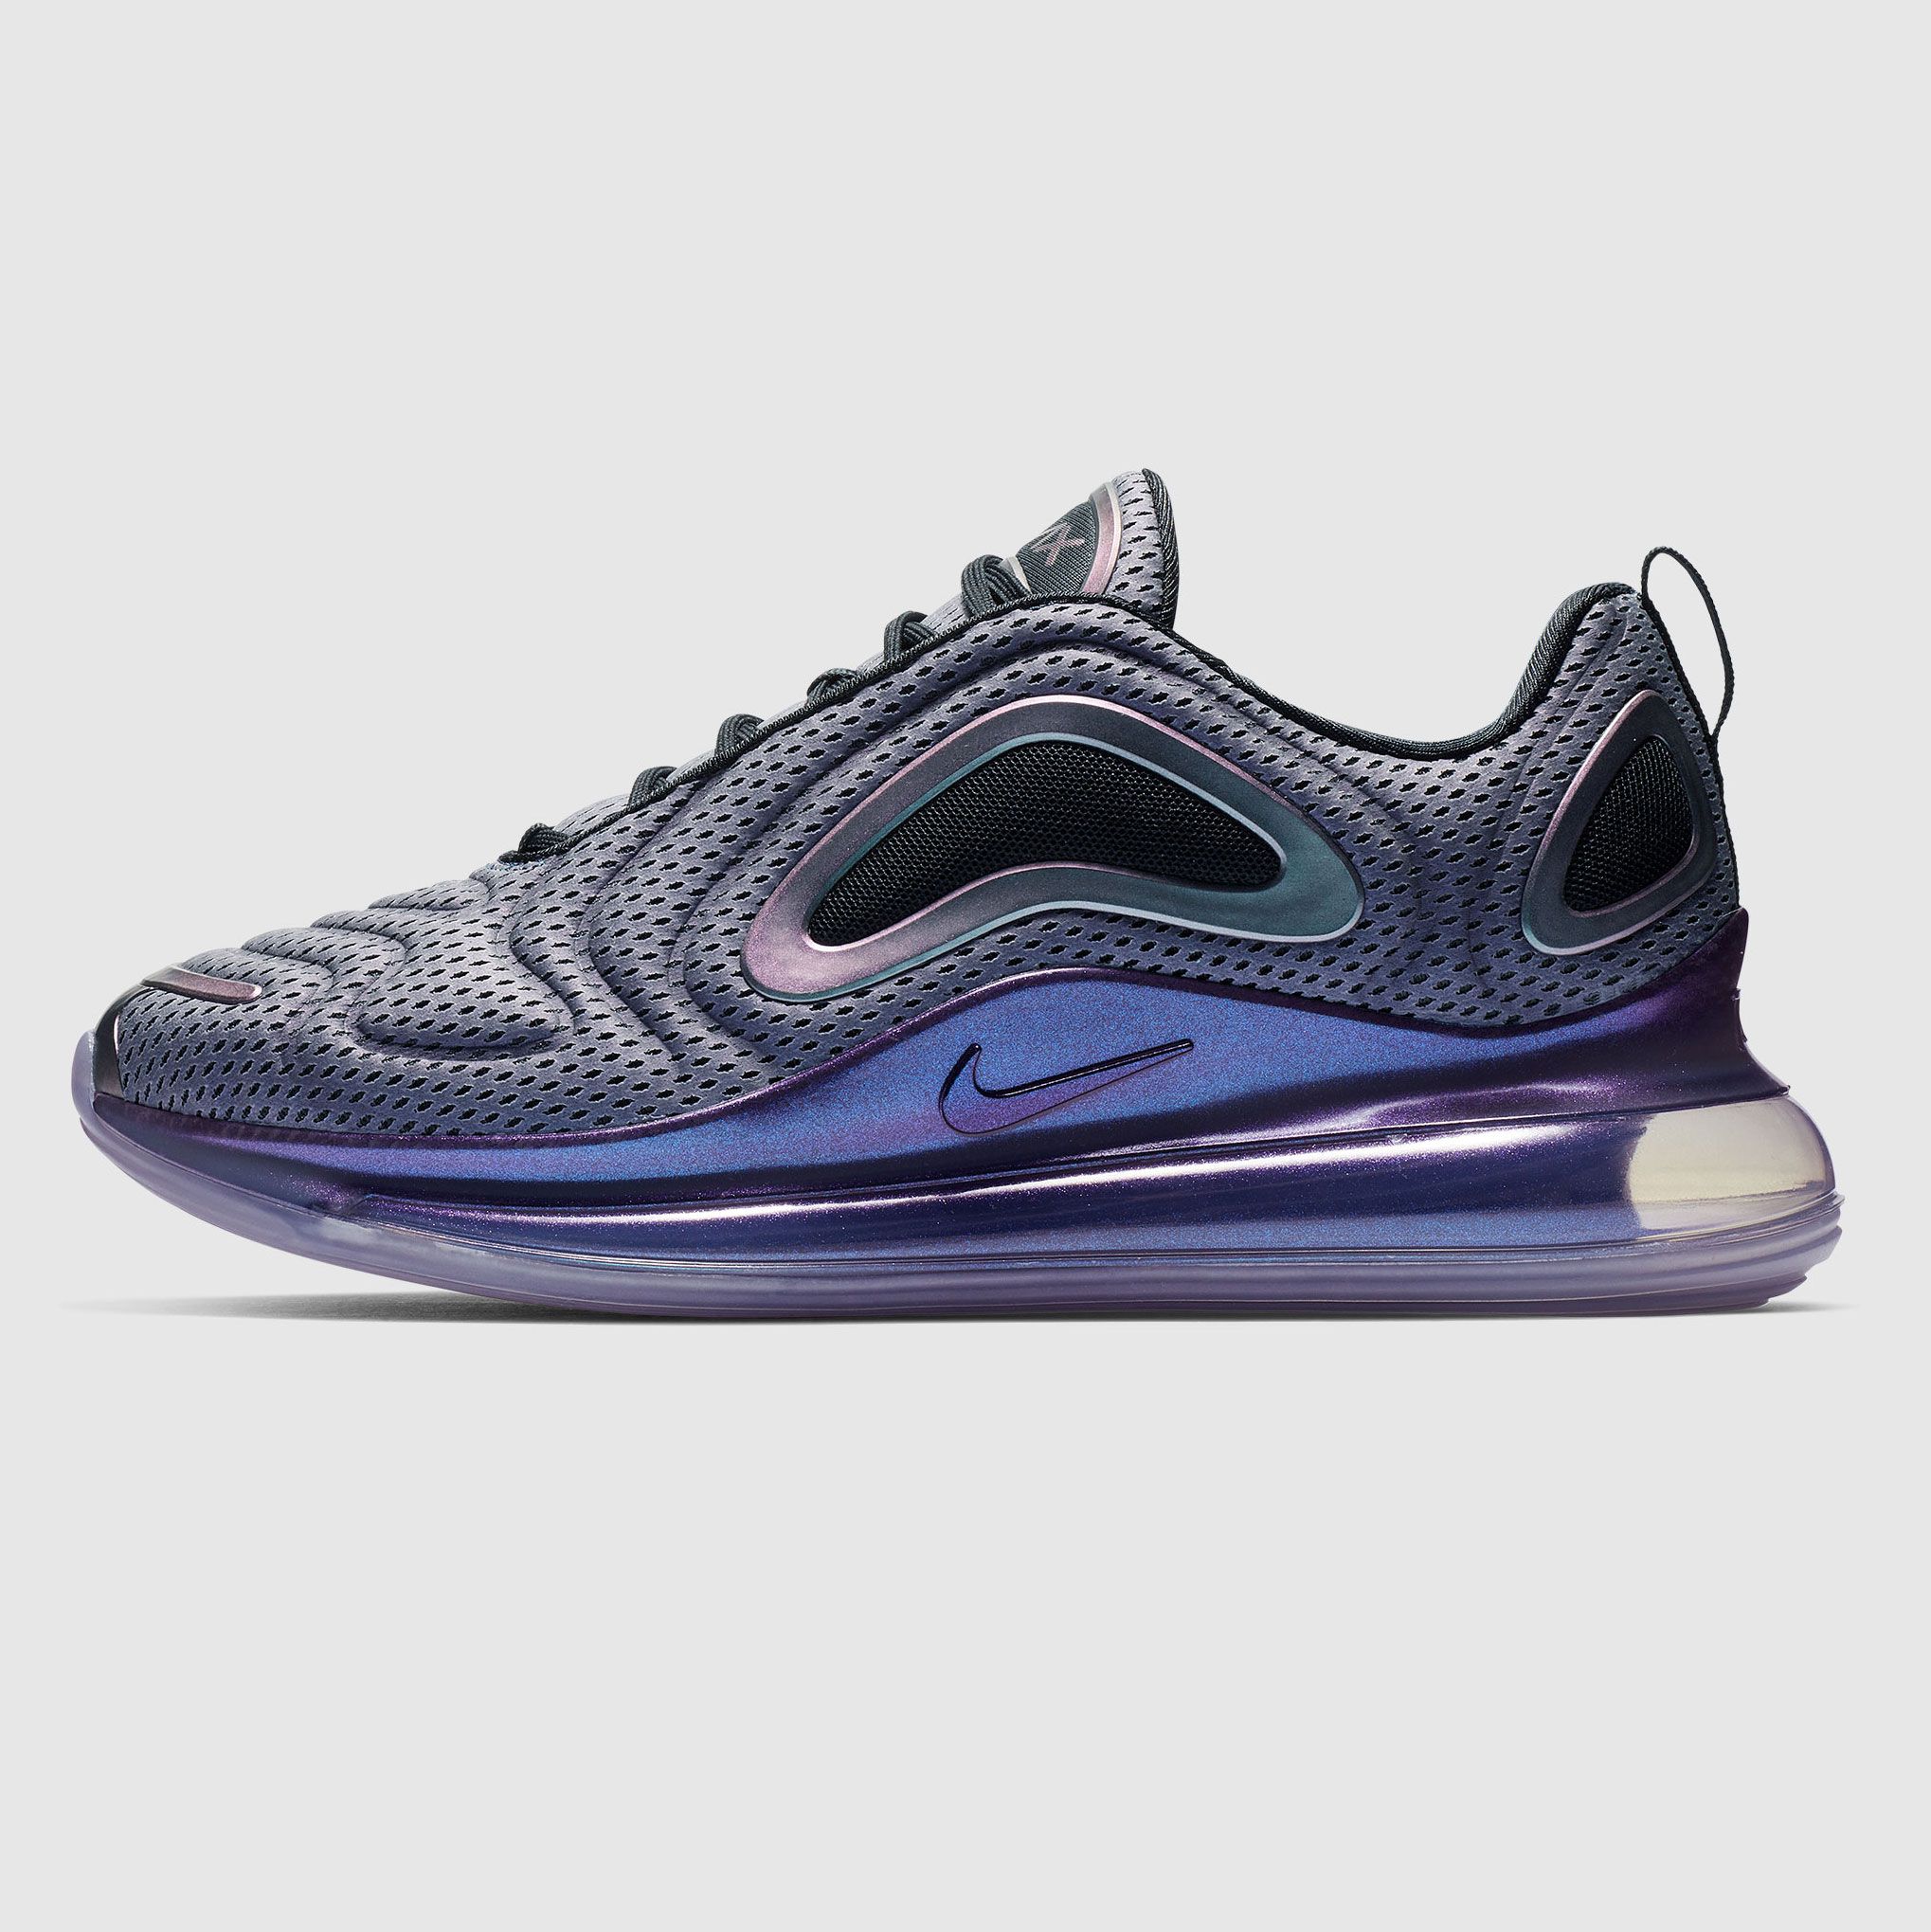 Nike Air Max 720 trainers in pink and blue